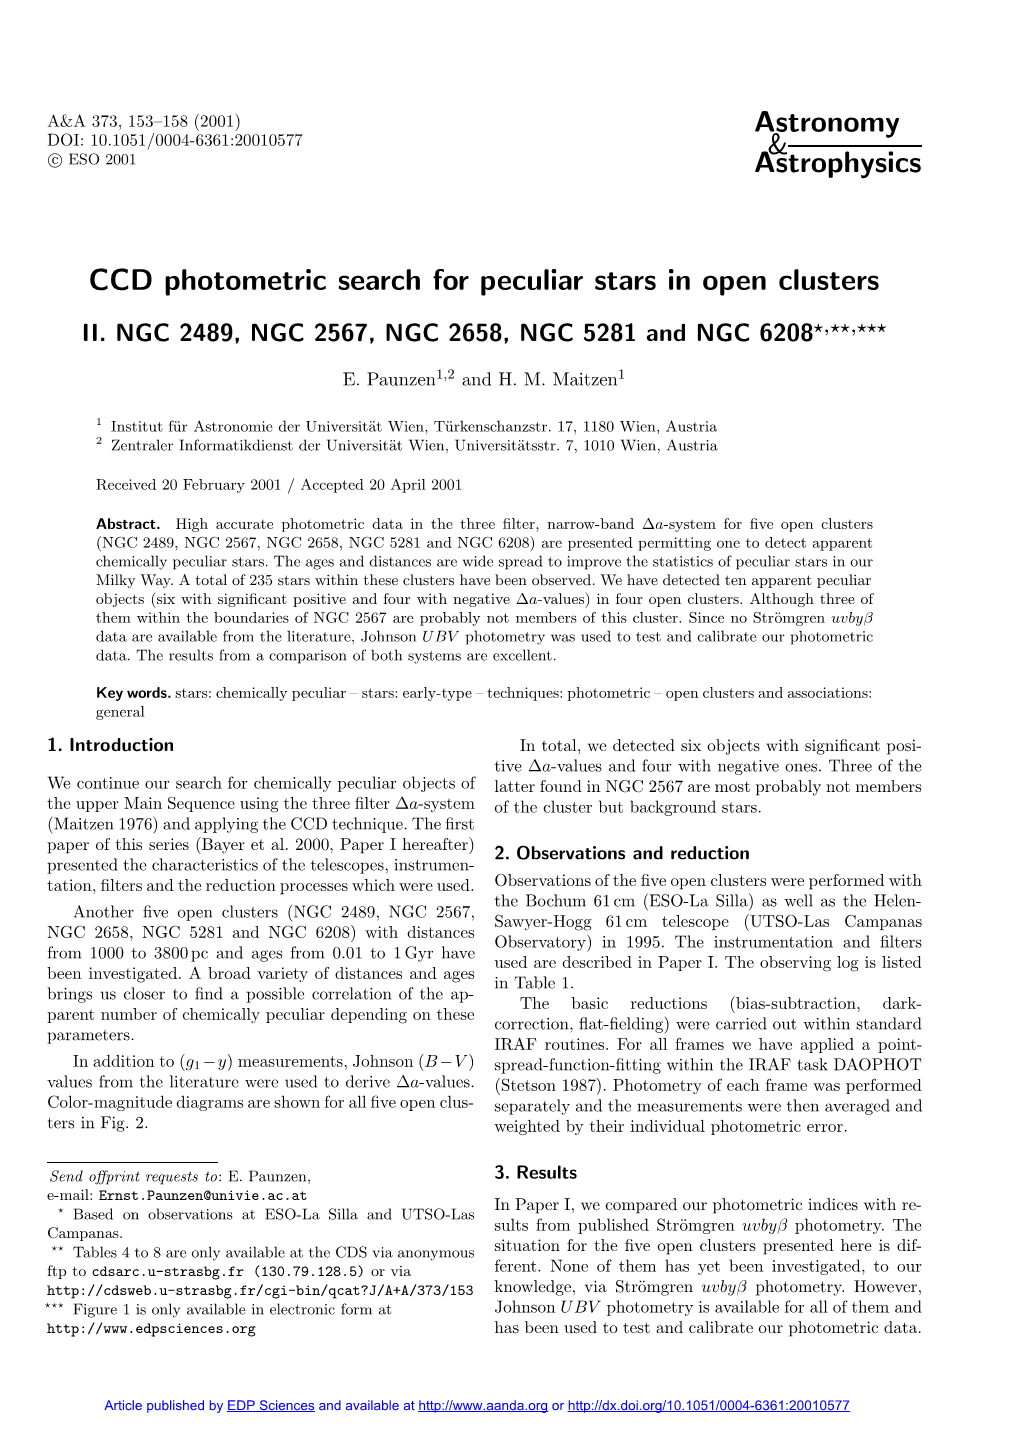 CCD Photometric Search for Peculiar Stars in Open Clusters